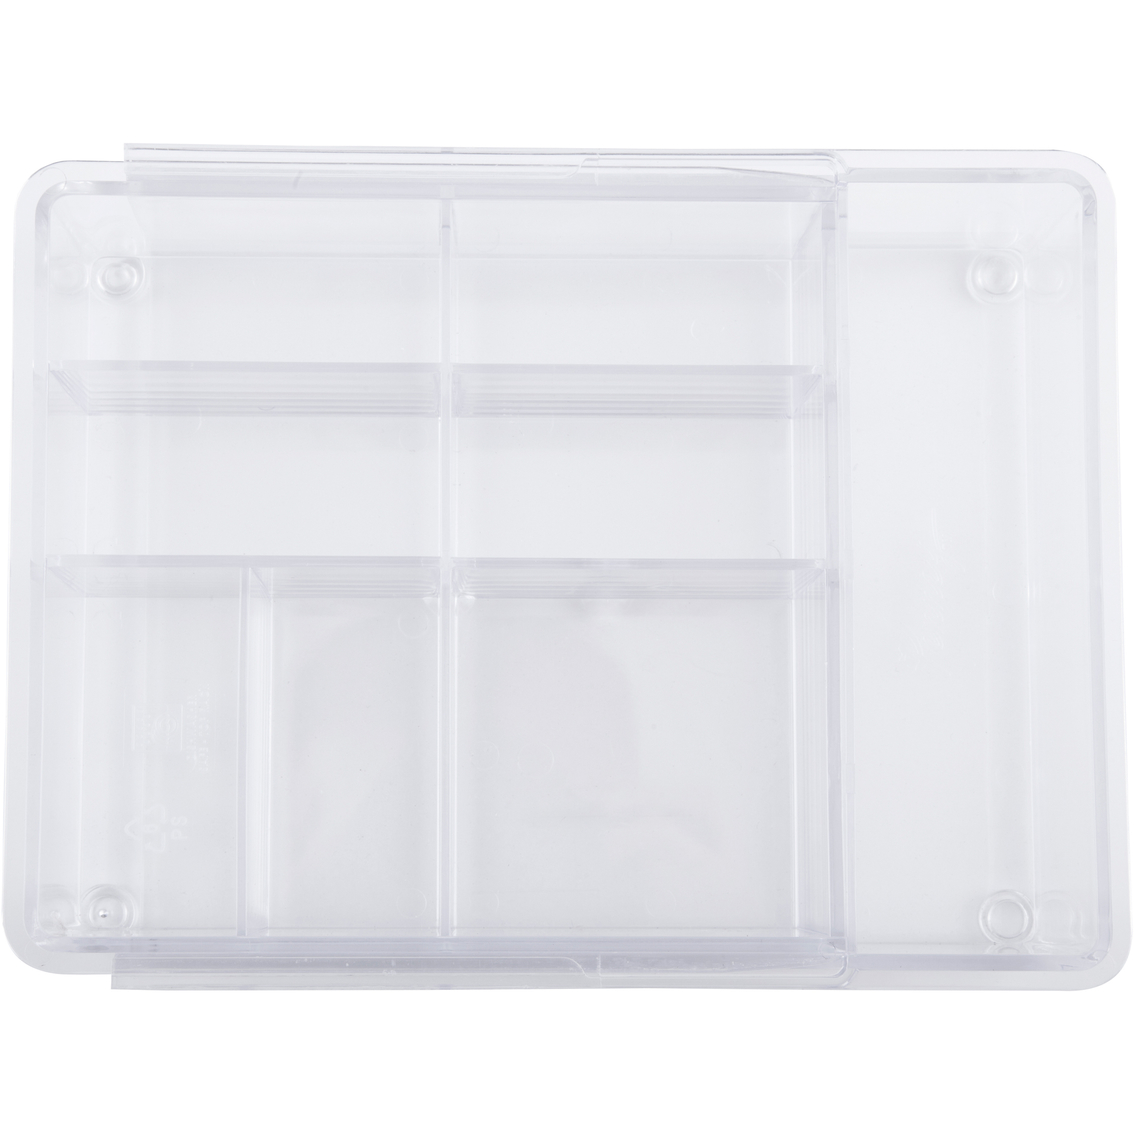 Kenney Storage Made Simple 8 Compartment Expandable Drawer Organizer Tray, Set of 2 - Image 2 of 6